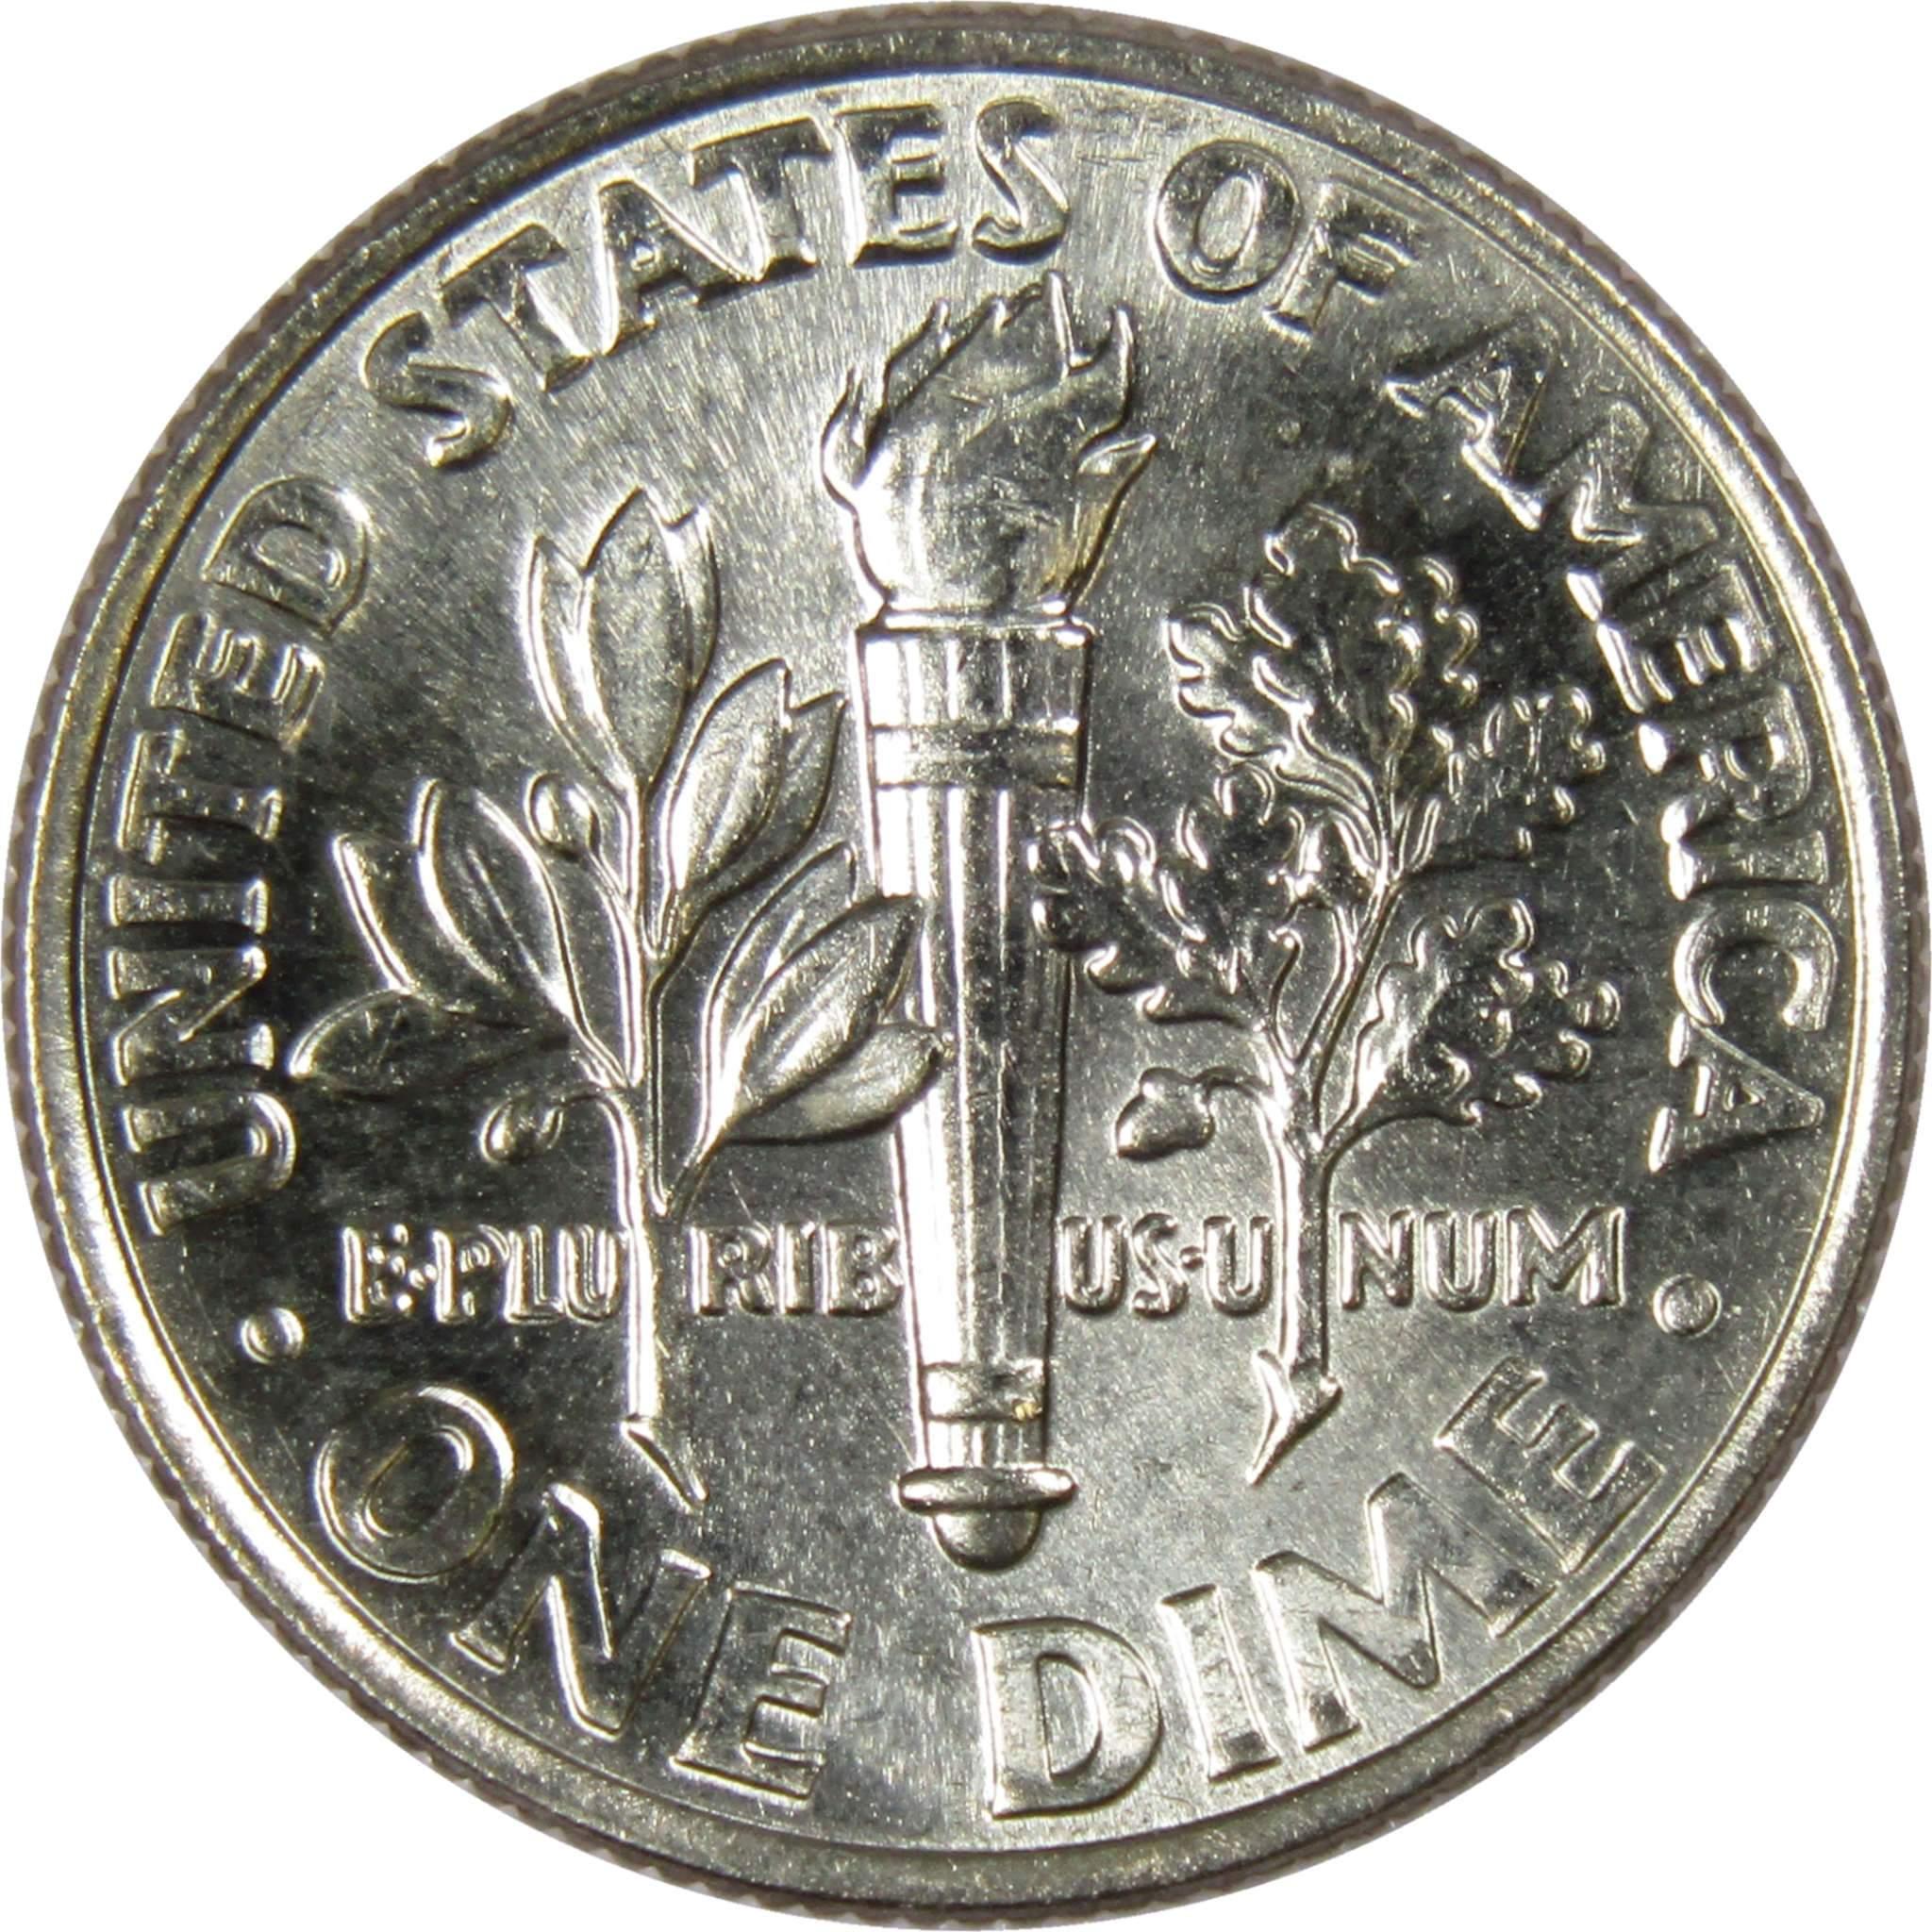 2004 D Roosevelt Dime BU Uncirculated Mint State 10c US Coin Collectible